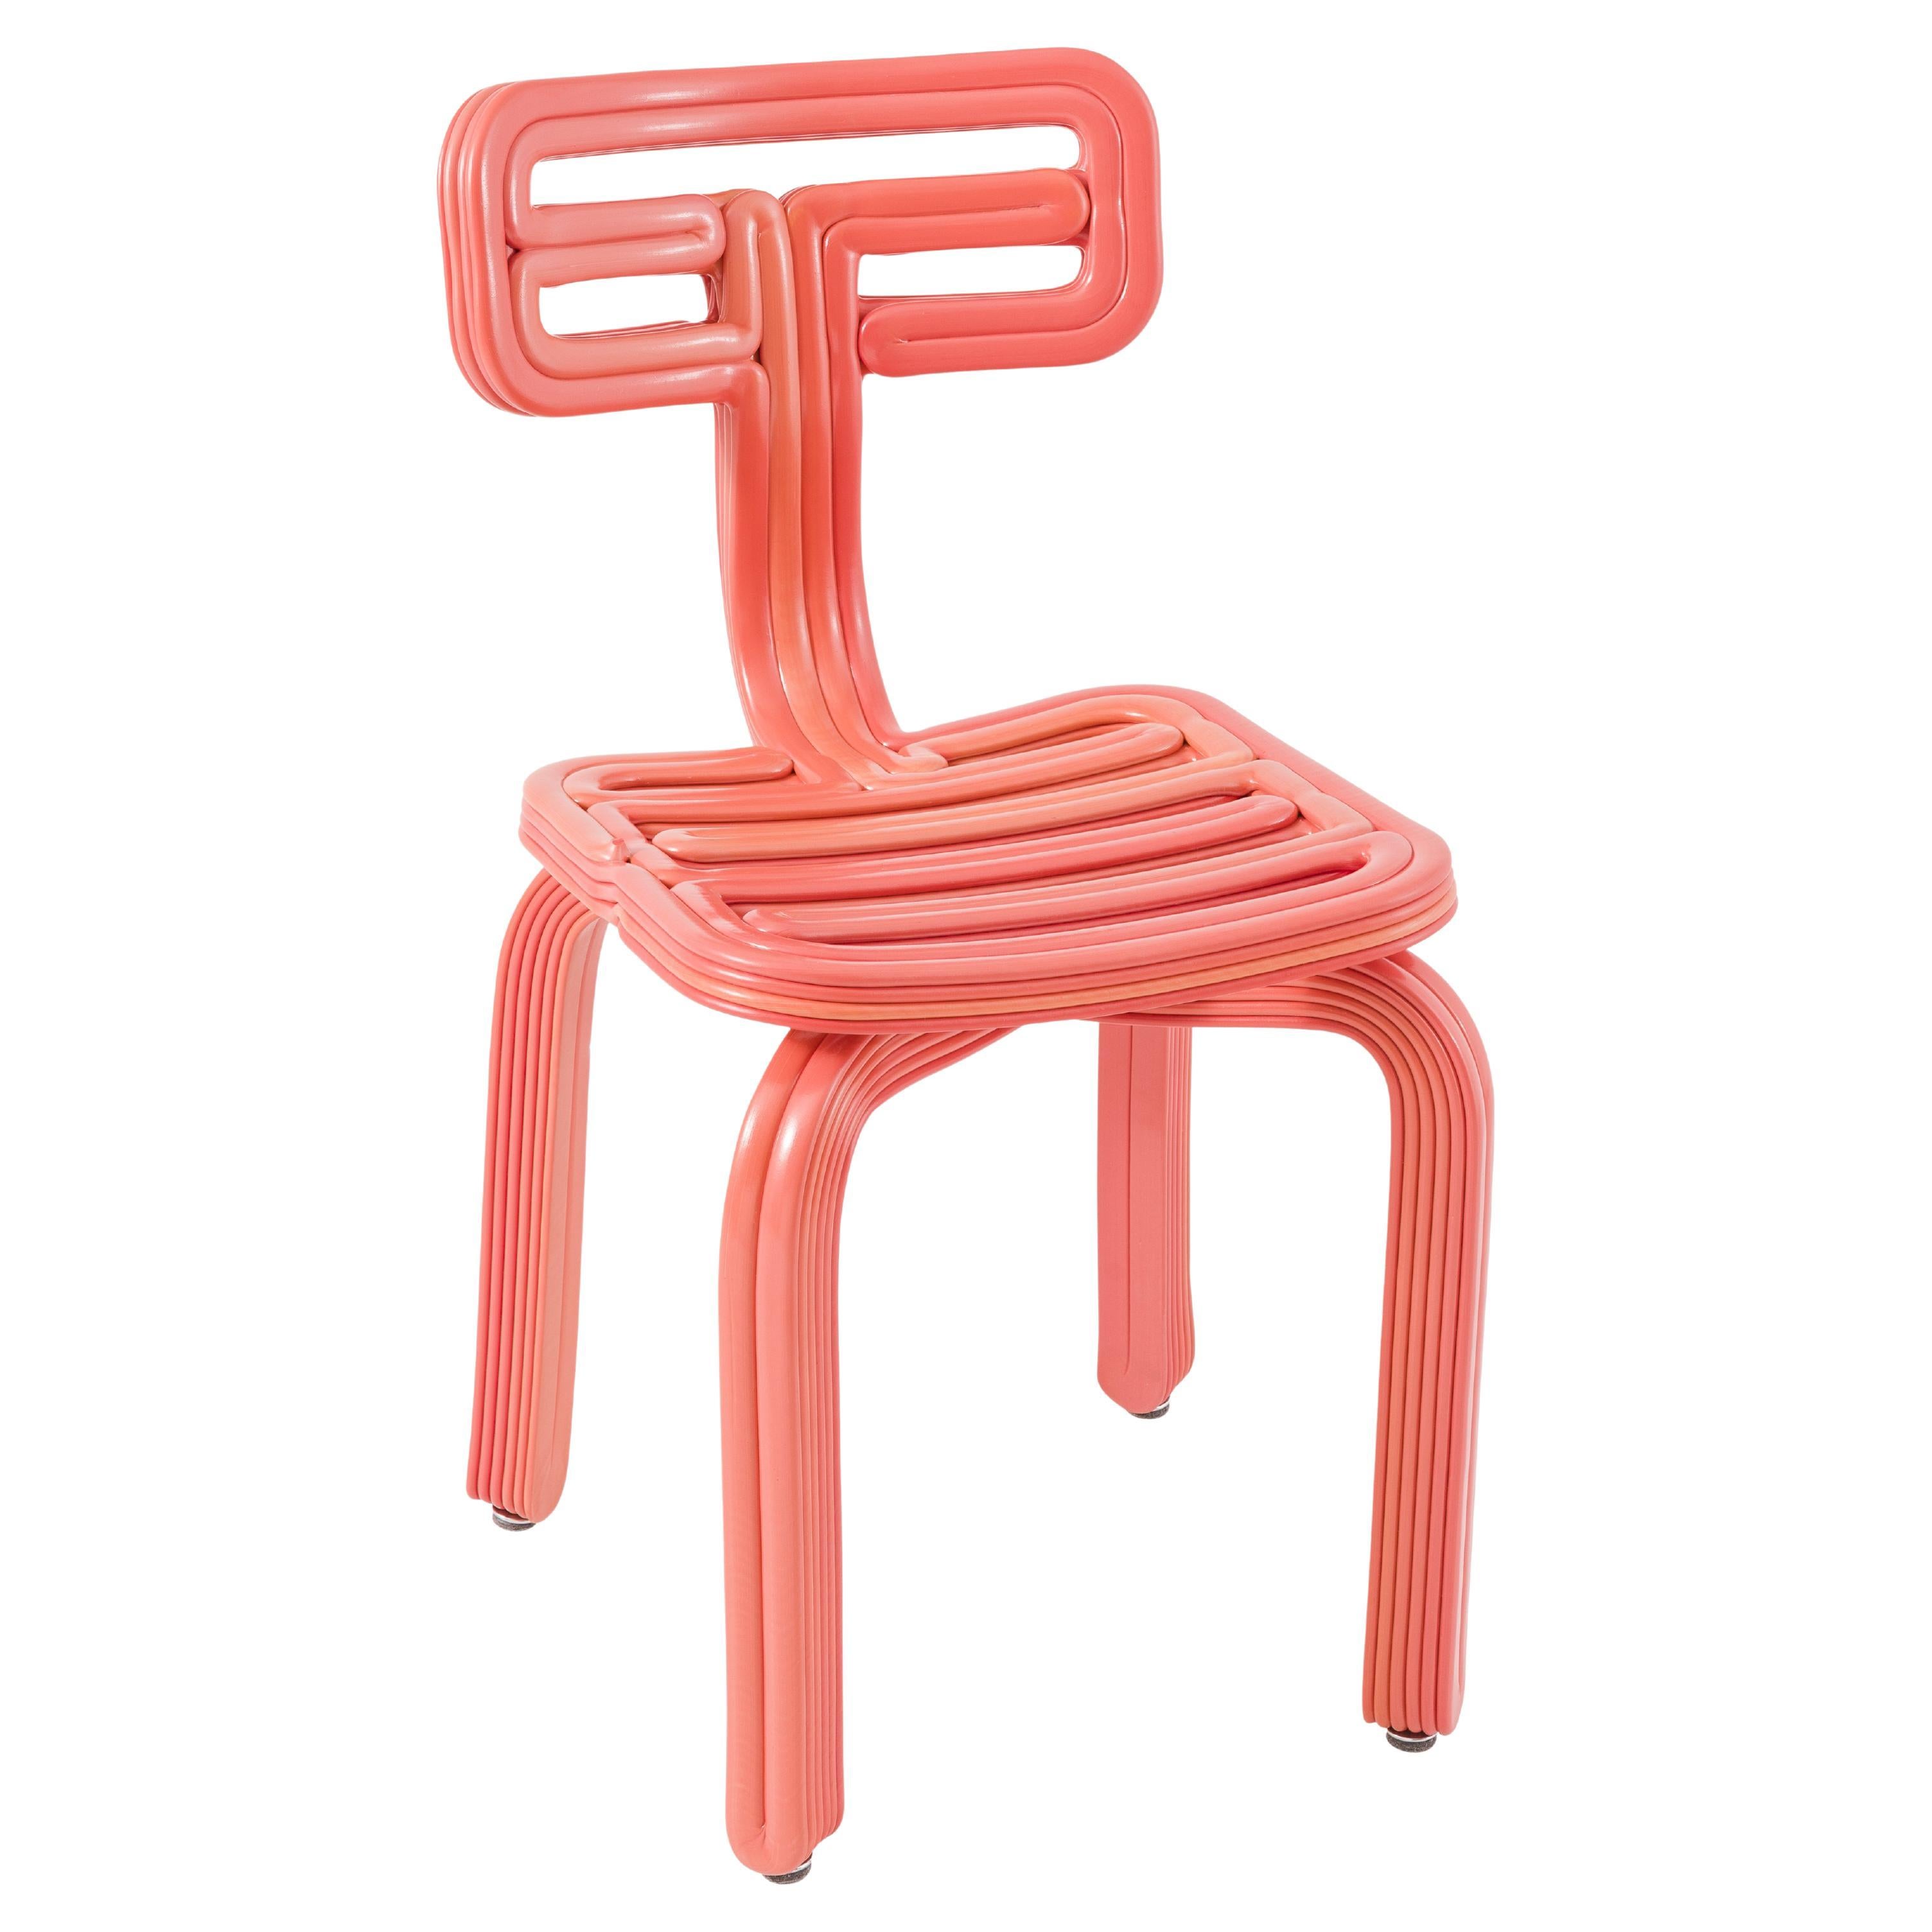 Chubby Chair in Ember 3D Printed recycled plastic by KOOIJ